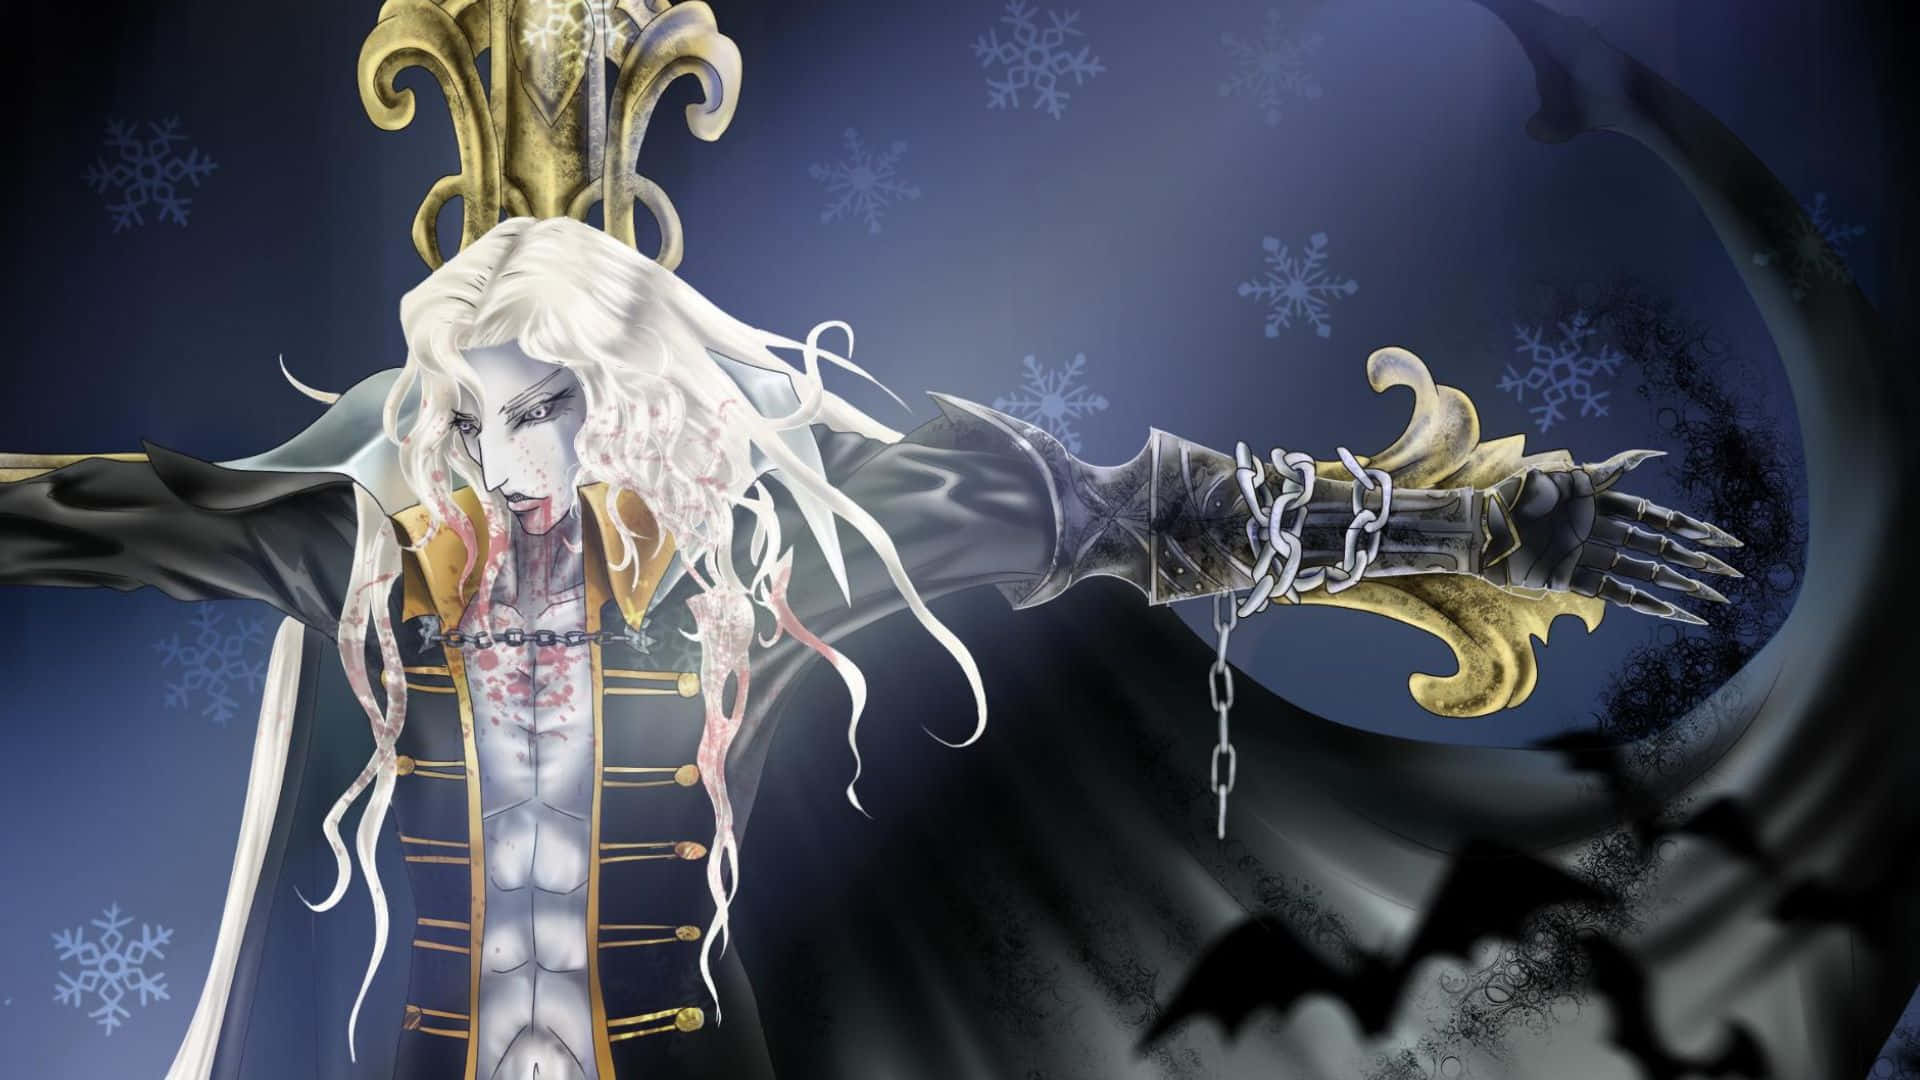 Alucard From Castlevania Unleashed - The Dark Prince In Battle Wallpaper